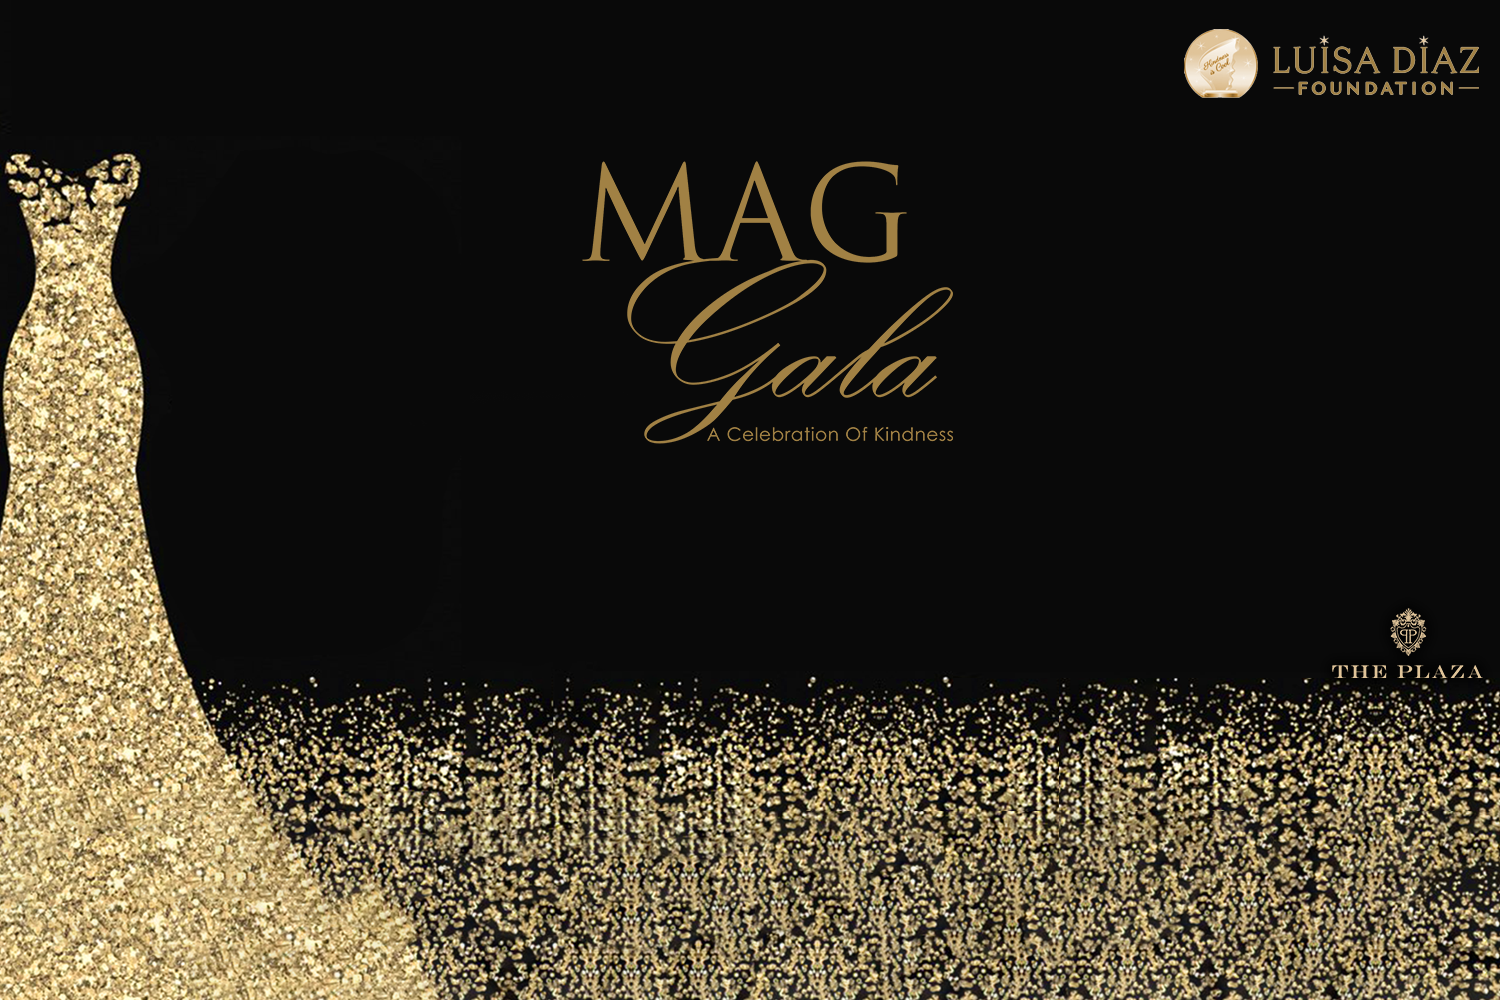 Mag Gala 2023: Celebration of Kindness at The Plaza – Hosted by WABC’s Ernie Anastos on May 18th